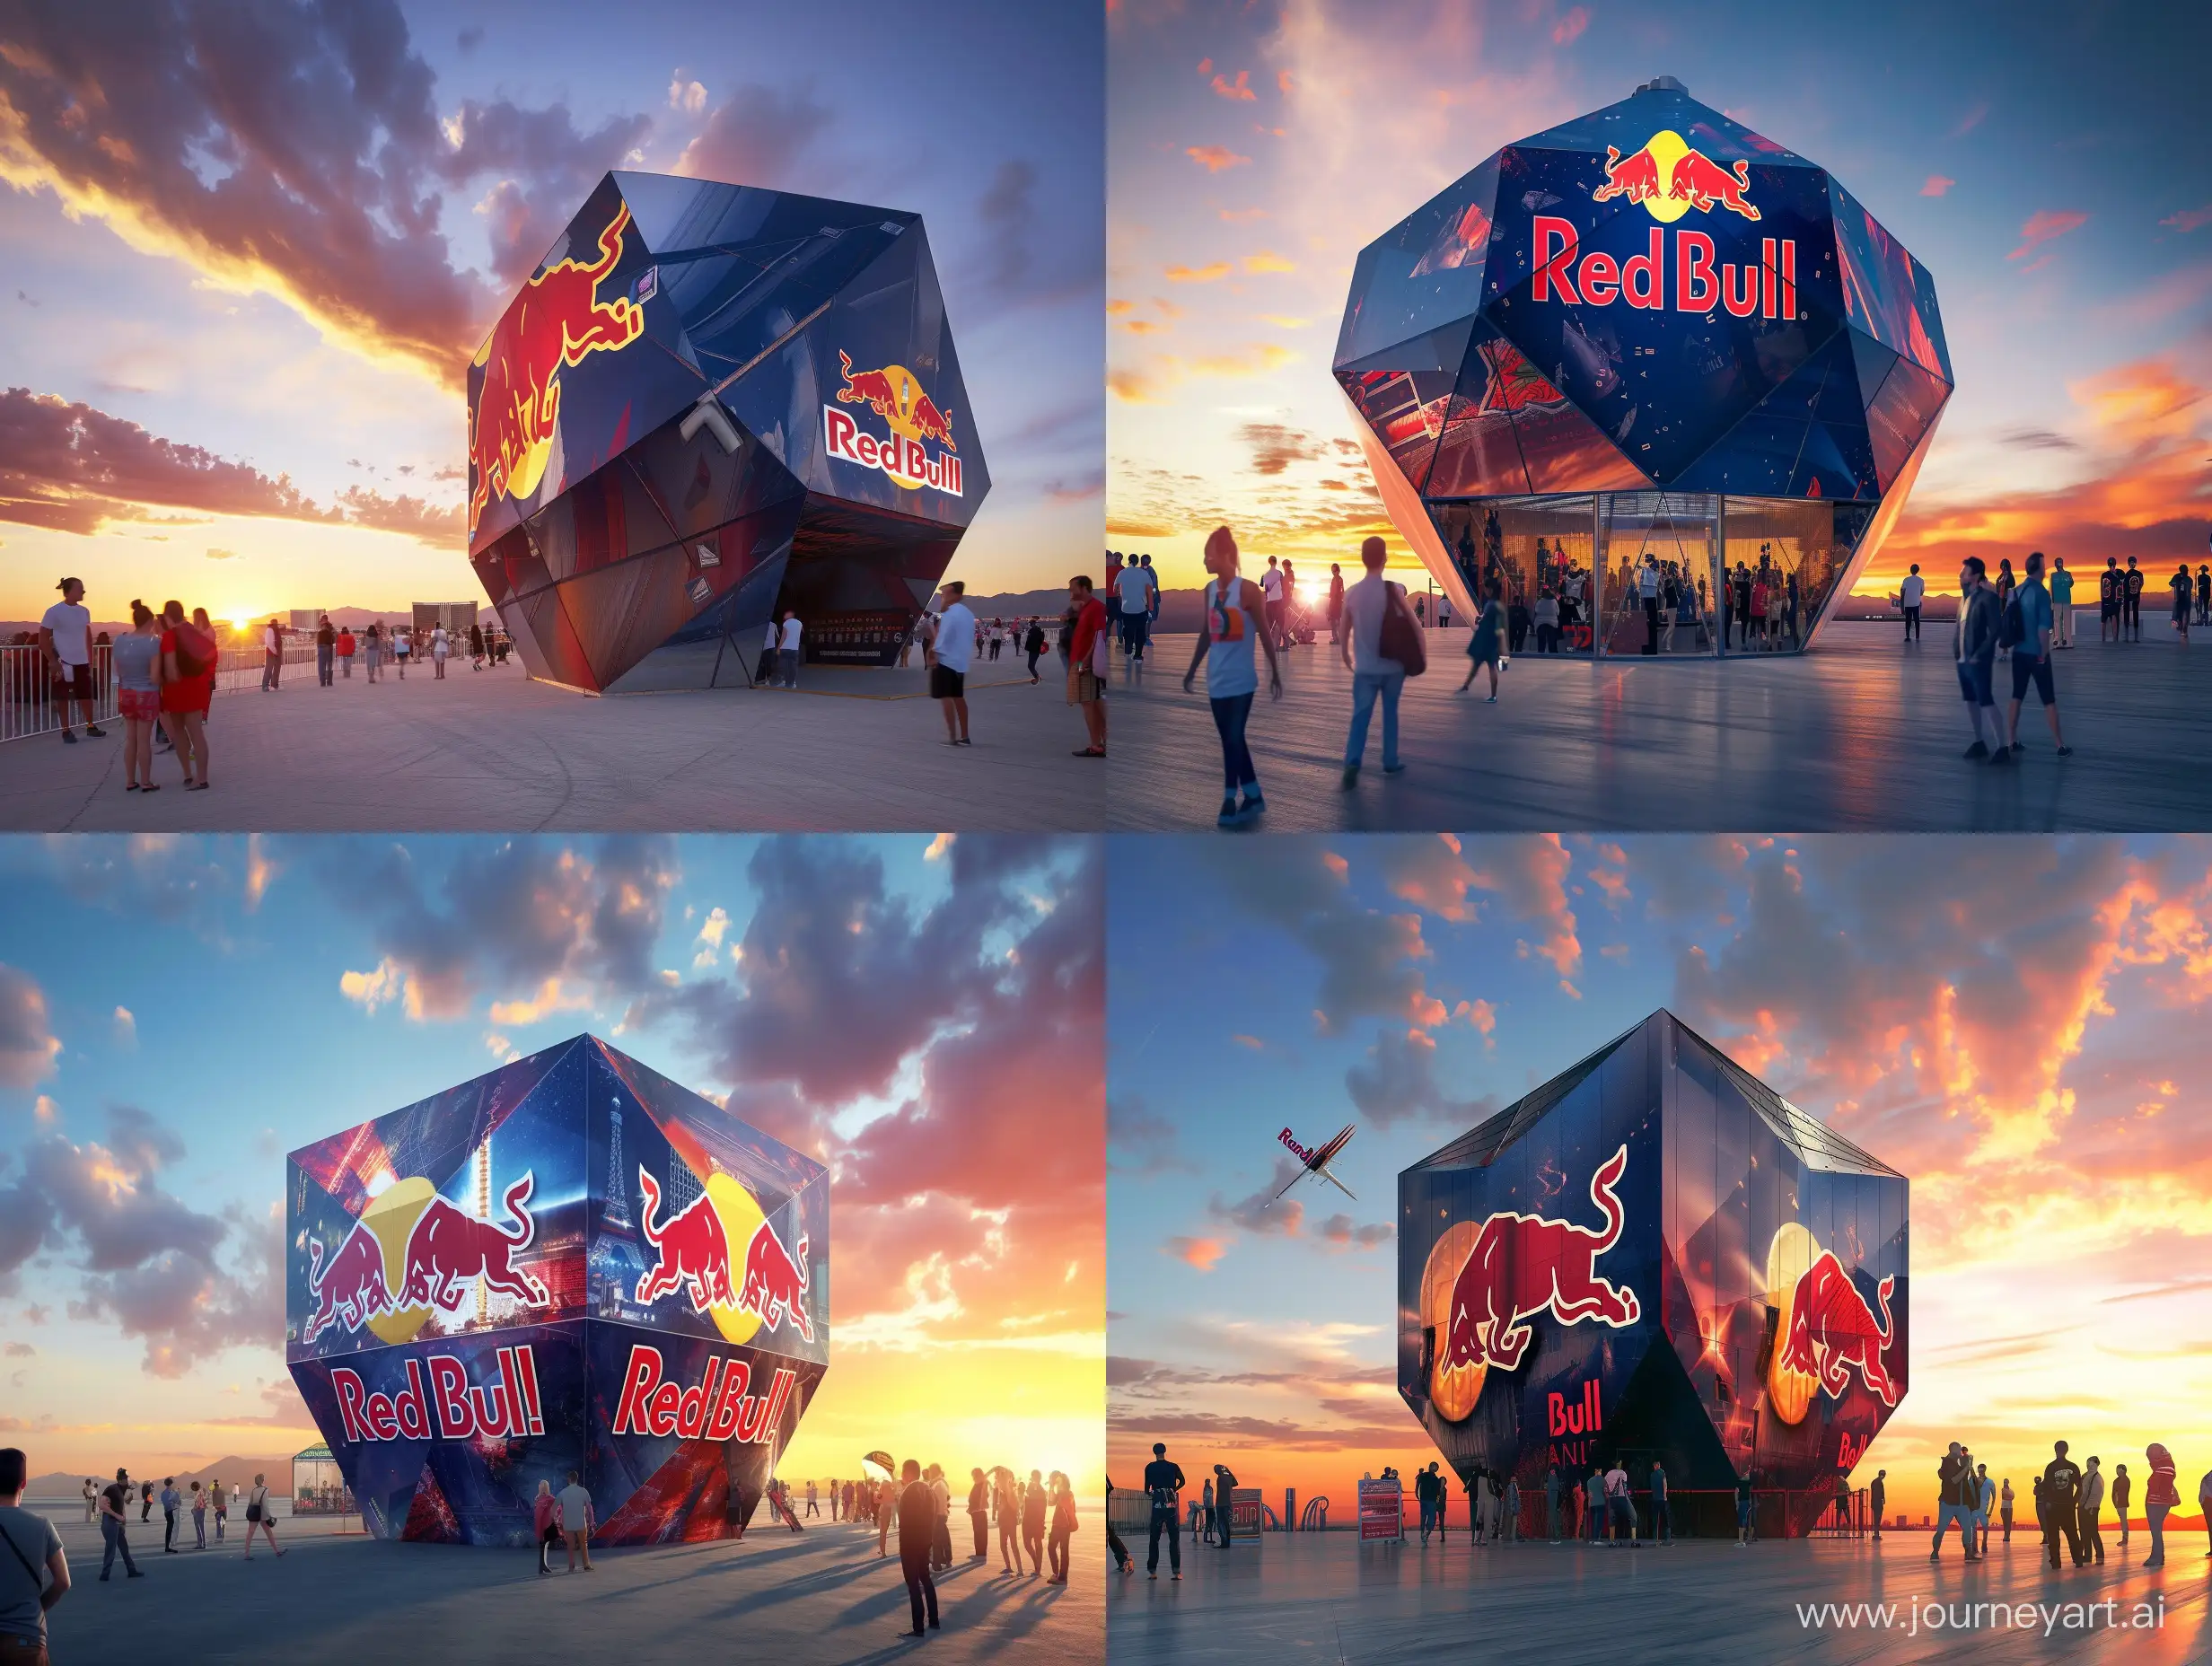 Imagine the Las Vegas Sphere, but owned by Red Bull. Instead of a Sphere, make it rhombus-shaped. Not very extree rhombus, but a shape that can be practical. 
Please have a realistic approach, make it it look like a photograph. Red Bull visuals have to cover the whole rhombus, not only a logo in a corner. The walls need to be able to be dismounted, transported somewhere else, and the building built again.
Please make sure the branding is correct. Make sure "Red Bull" is well written, and the logo is right. 

Please picture people around it, and nice sky and realistic sunset behind
